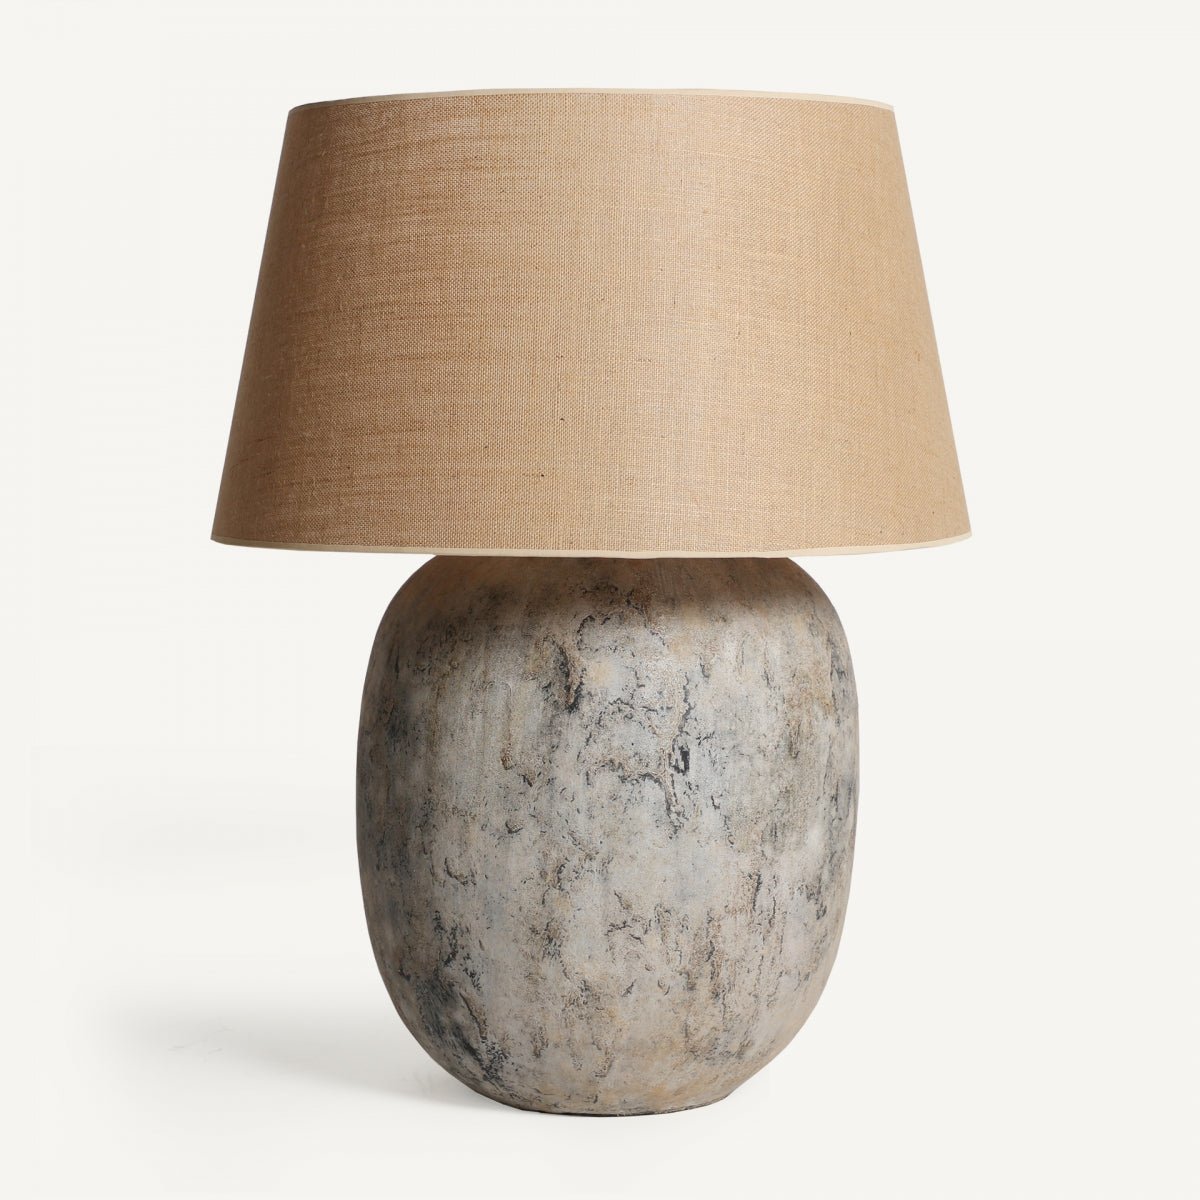 Beautiful floor or table lamp, completely up to you.